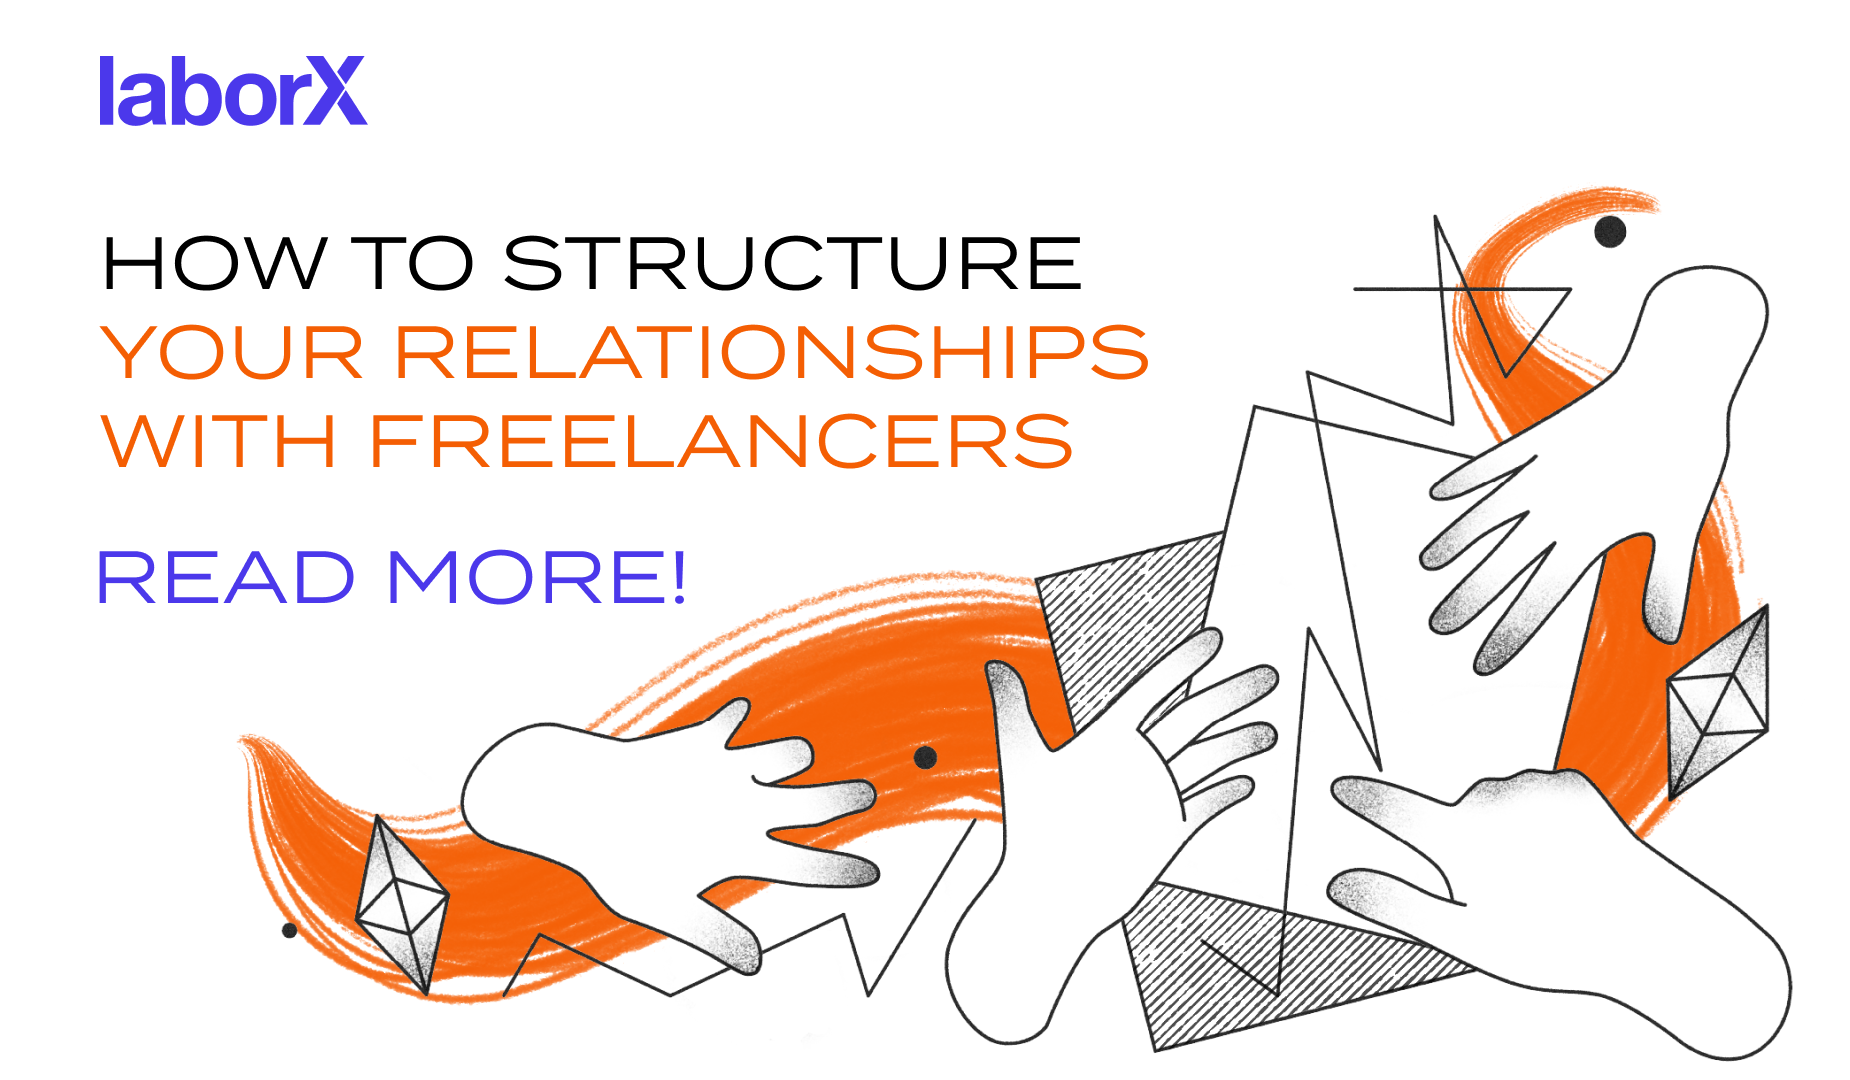 How To Structure Your Relationships With Freelancers